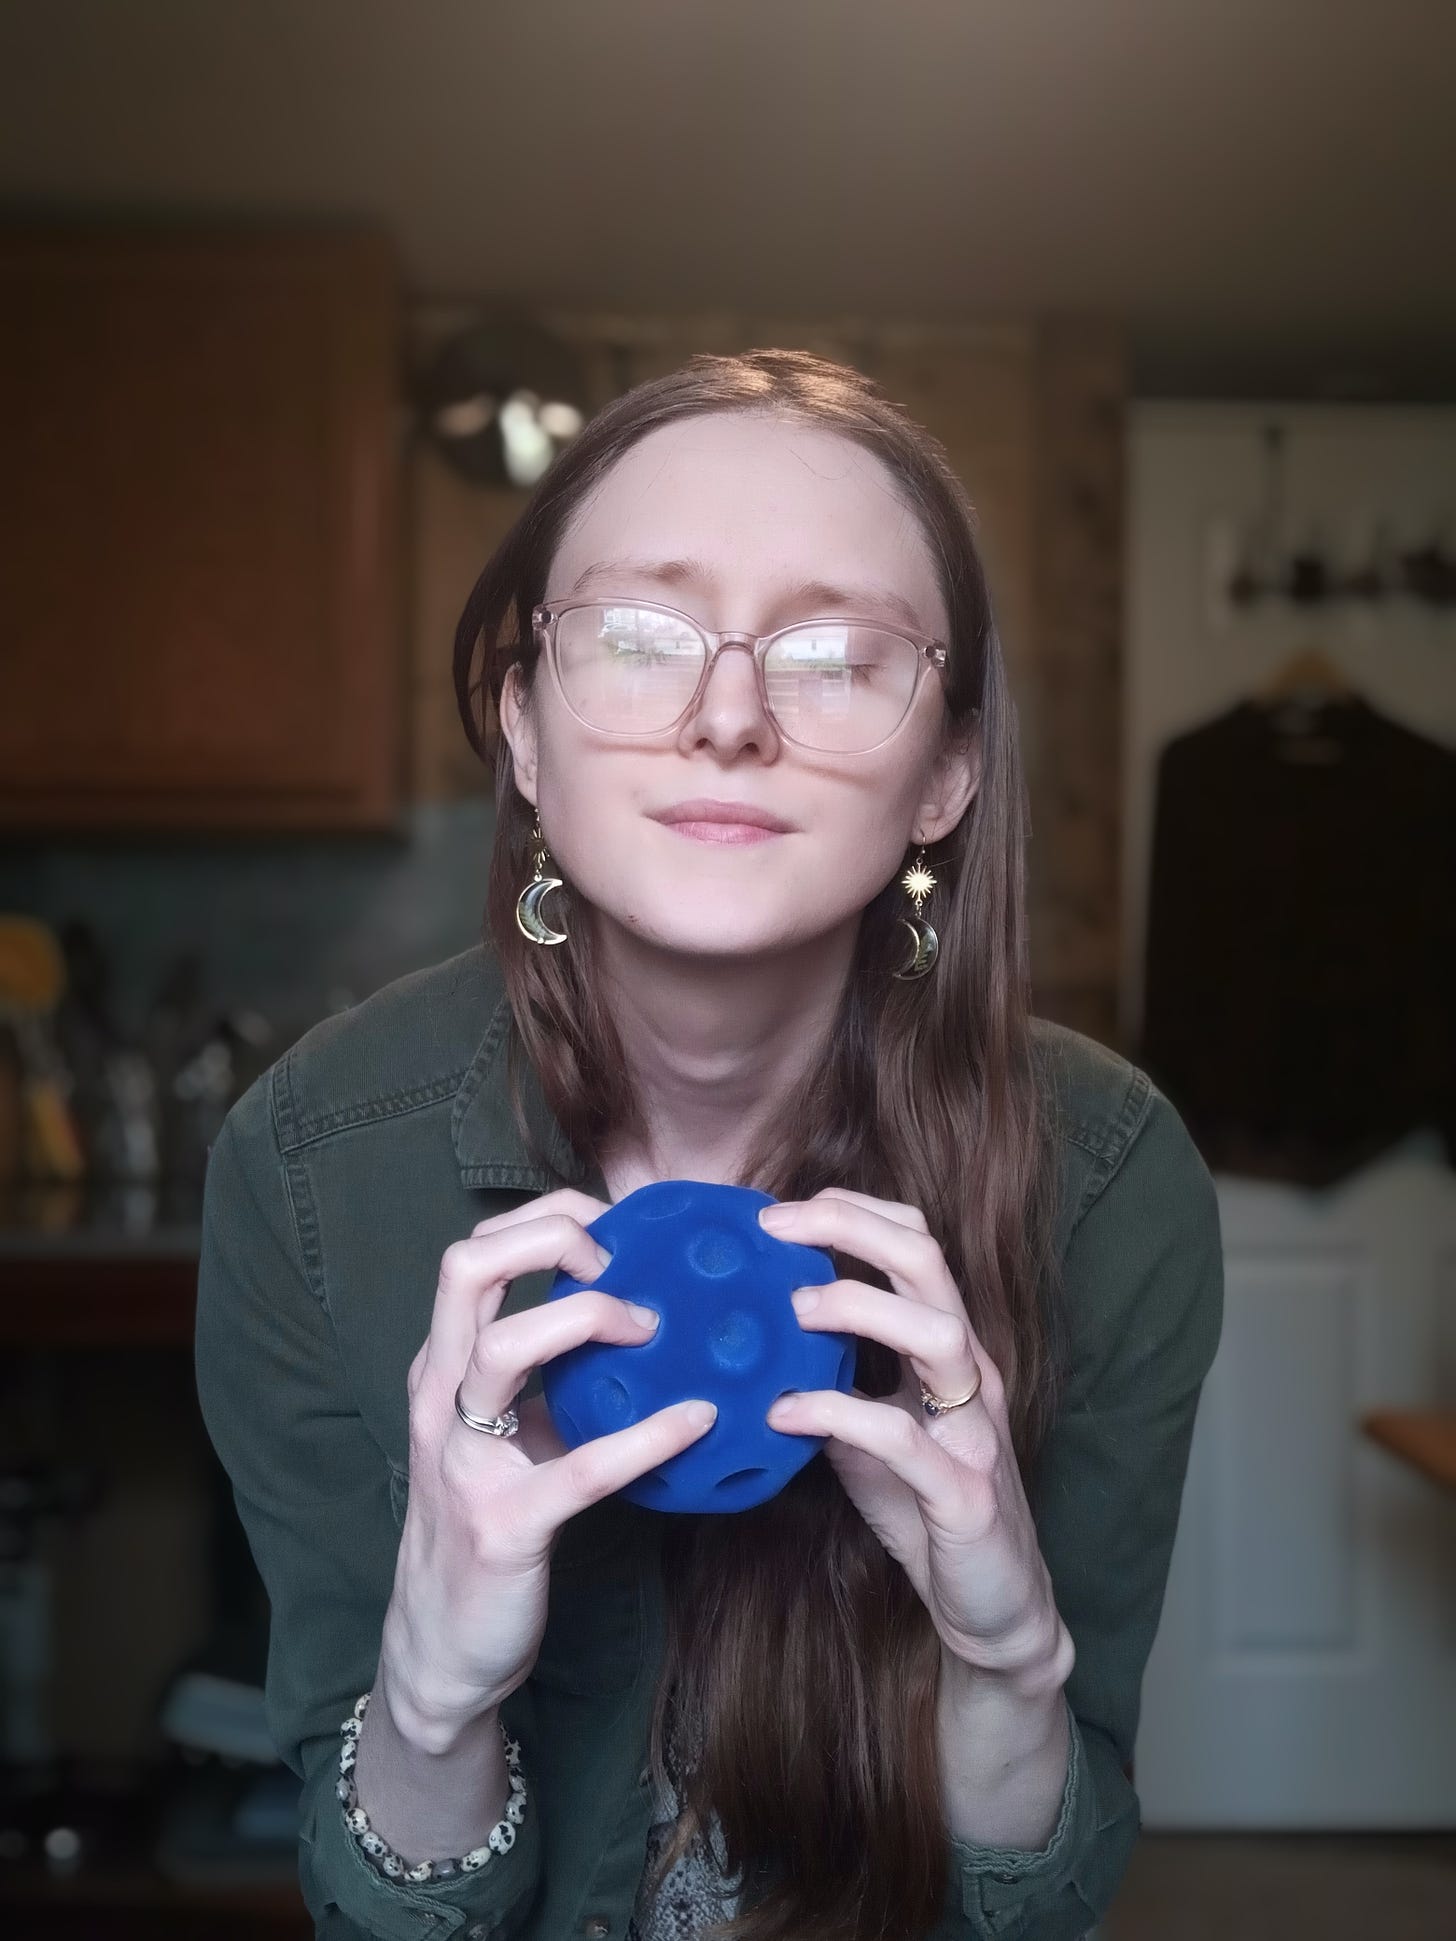 Kandi Zeller (she/her), a white woman with long reddish brown hair and pink glasses, holds a blue Rubbabu stress ball that looks like an oversized golf ball. Kandi has her eyes shut and appears calm.